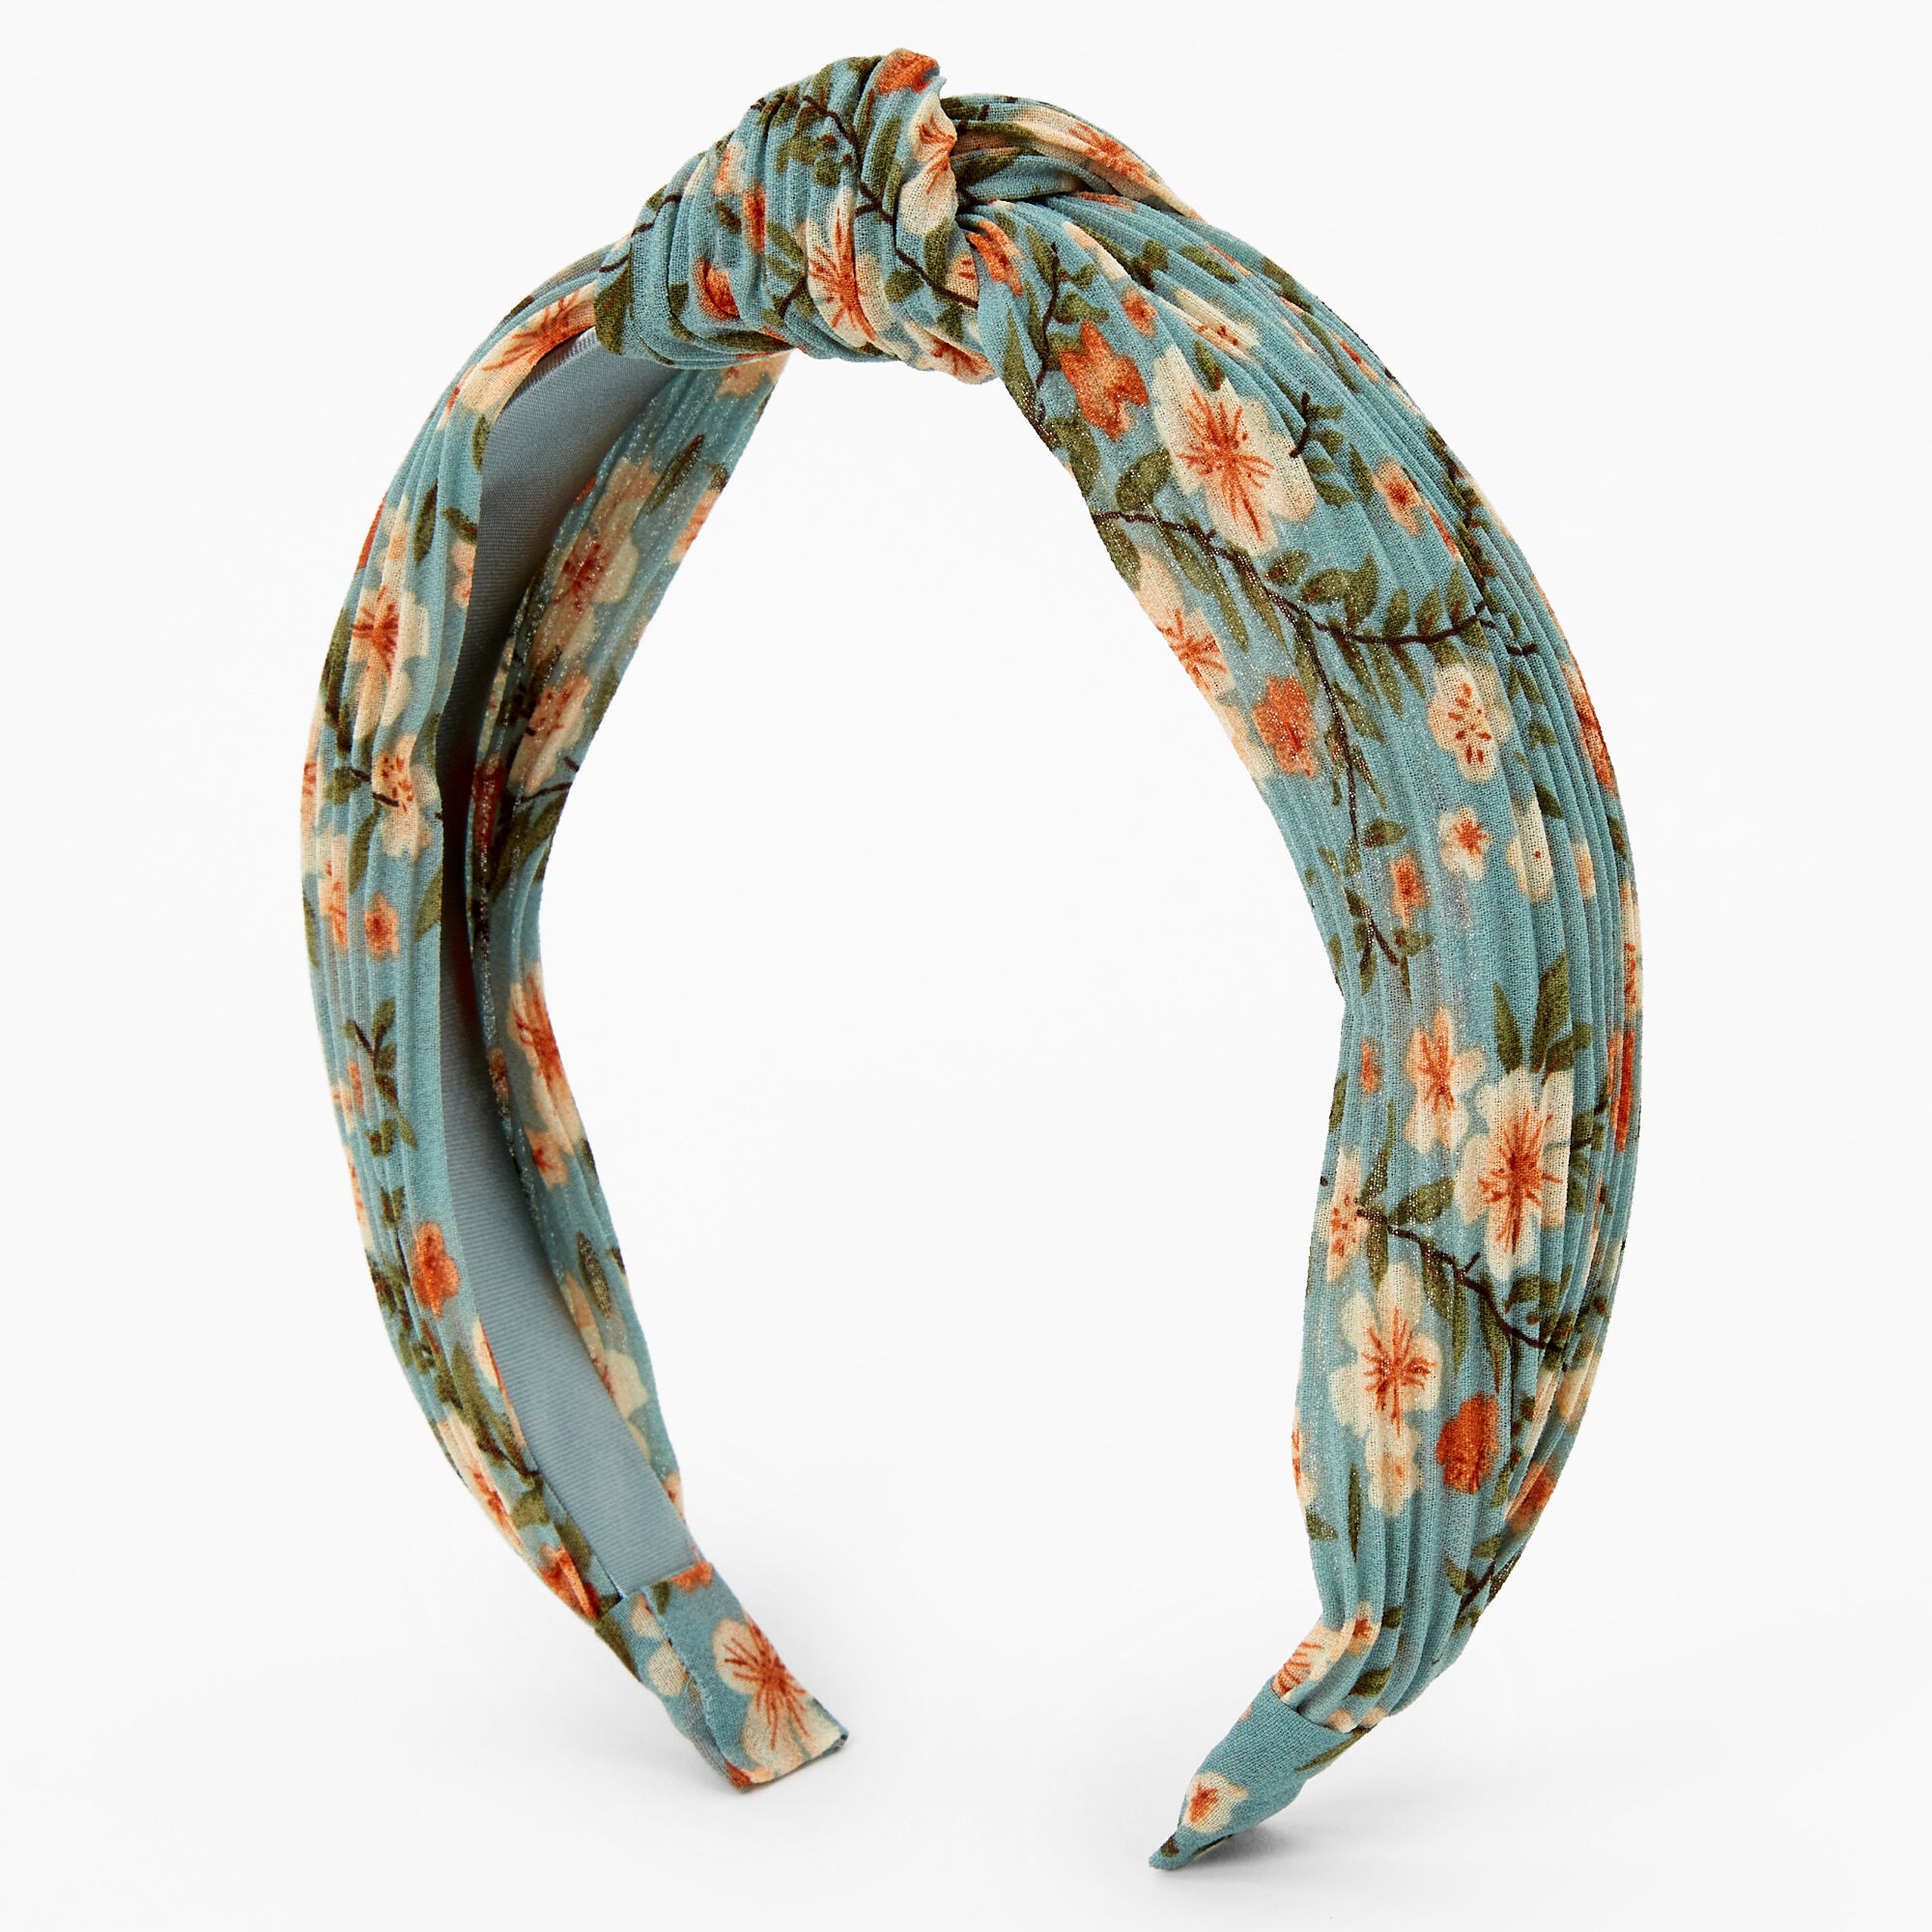 View Claires Floral Print Pleated Knotted Headband Seafoam information